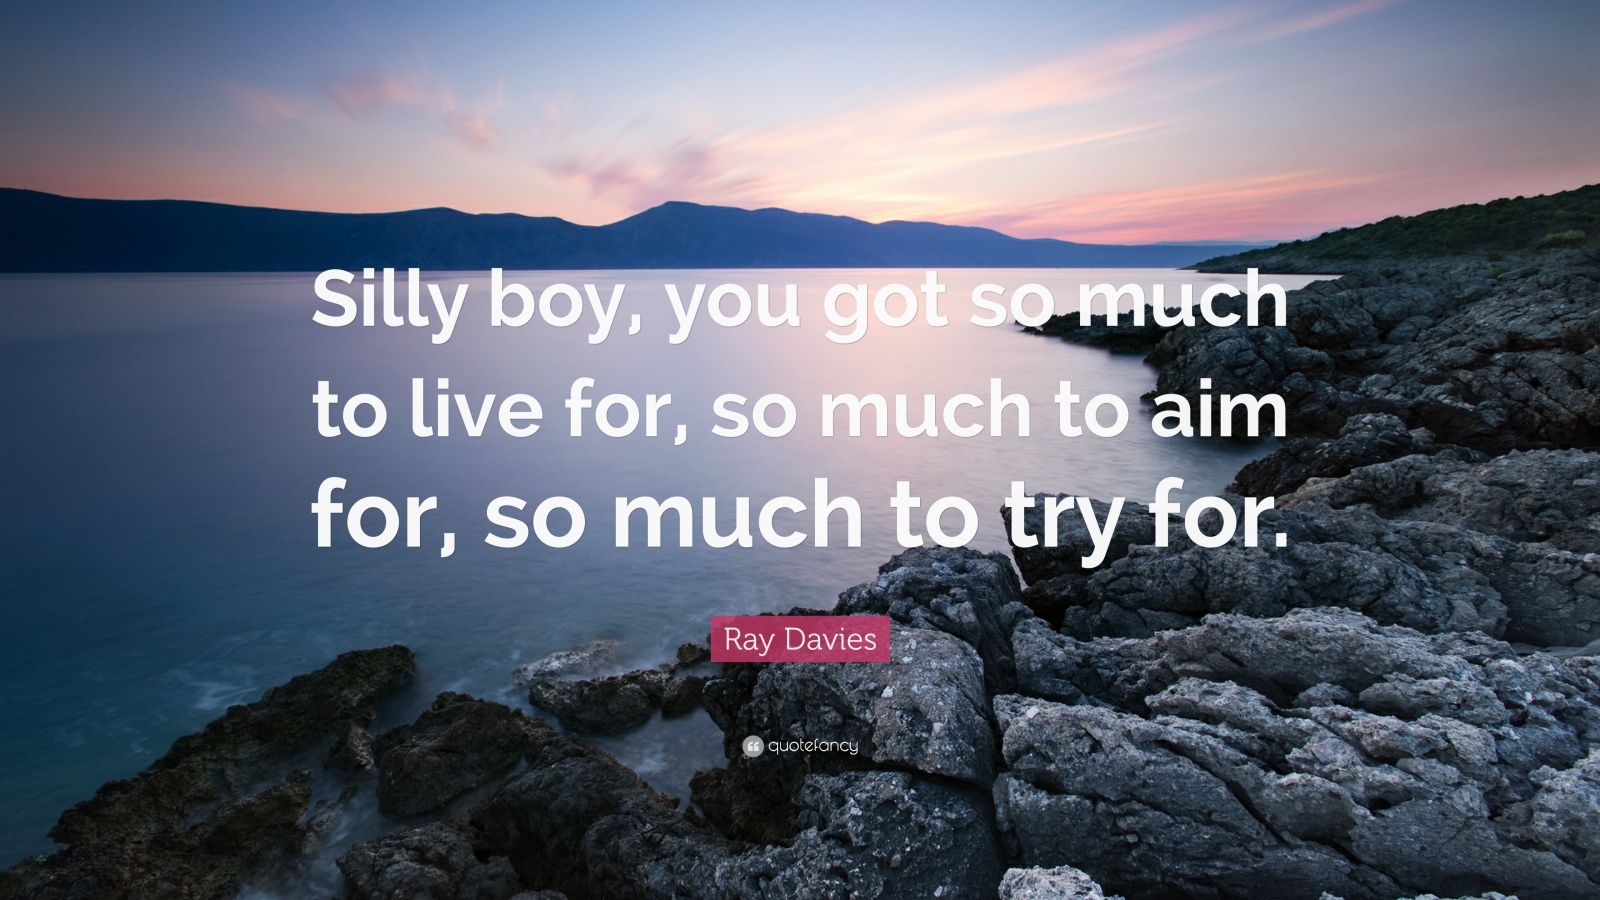 ray davies quote silly boy you got so much to live for so much to aim for so much to try for 7 wallpapers quotefancy ray davies quote silly boy you got